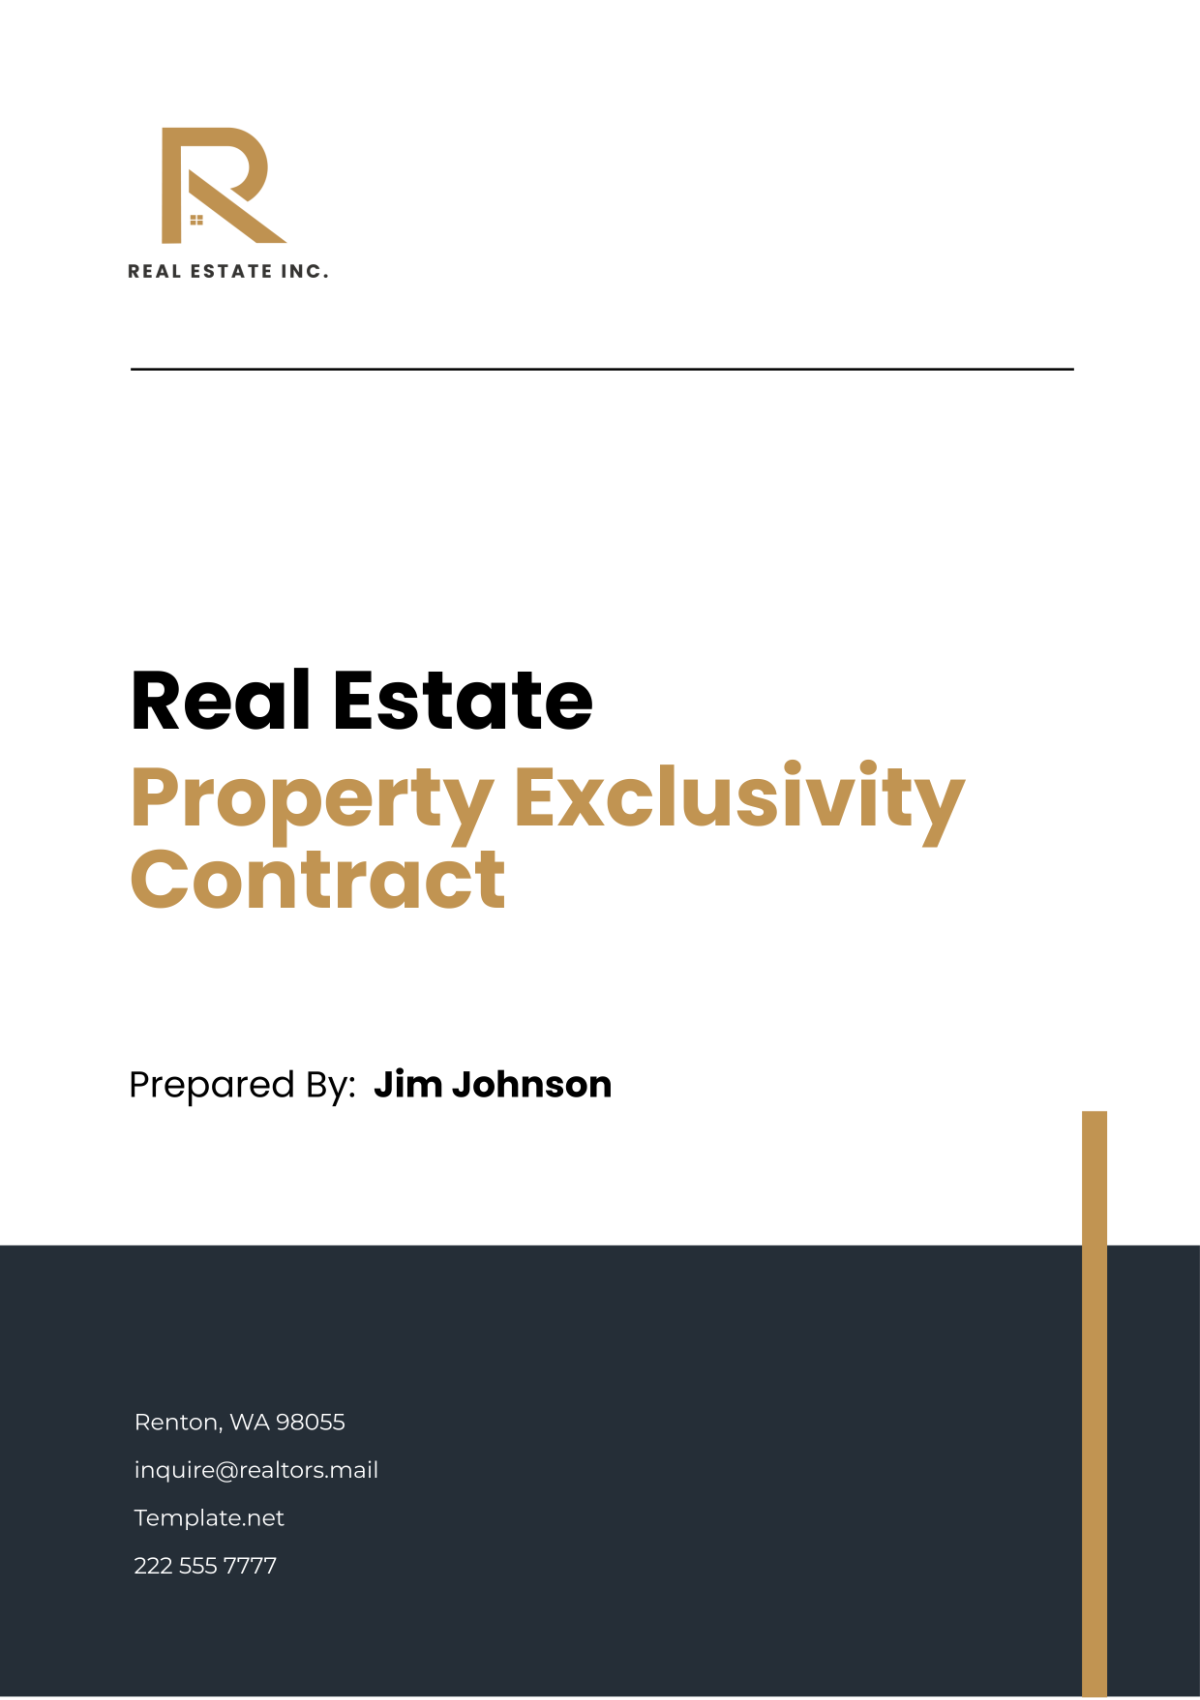 Free Real Estate Property Exclusivity Contract Template